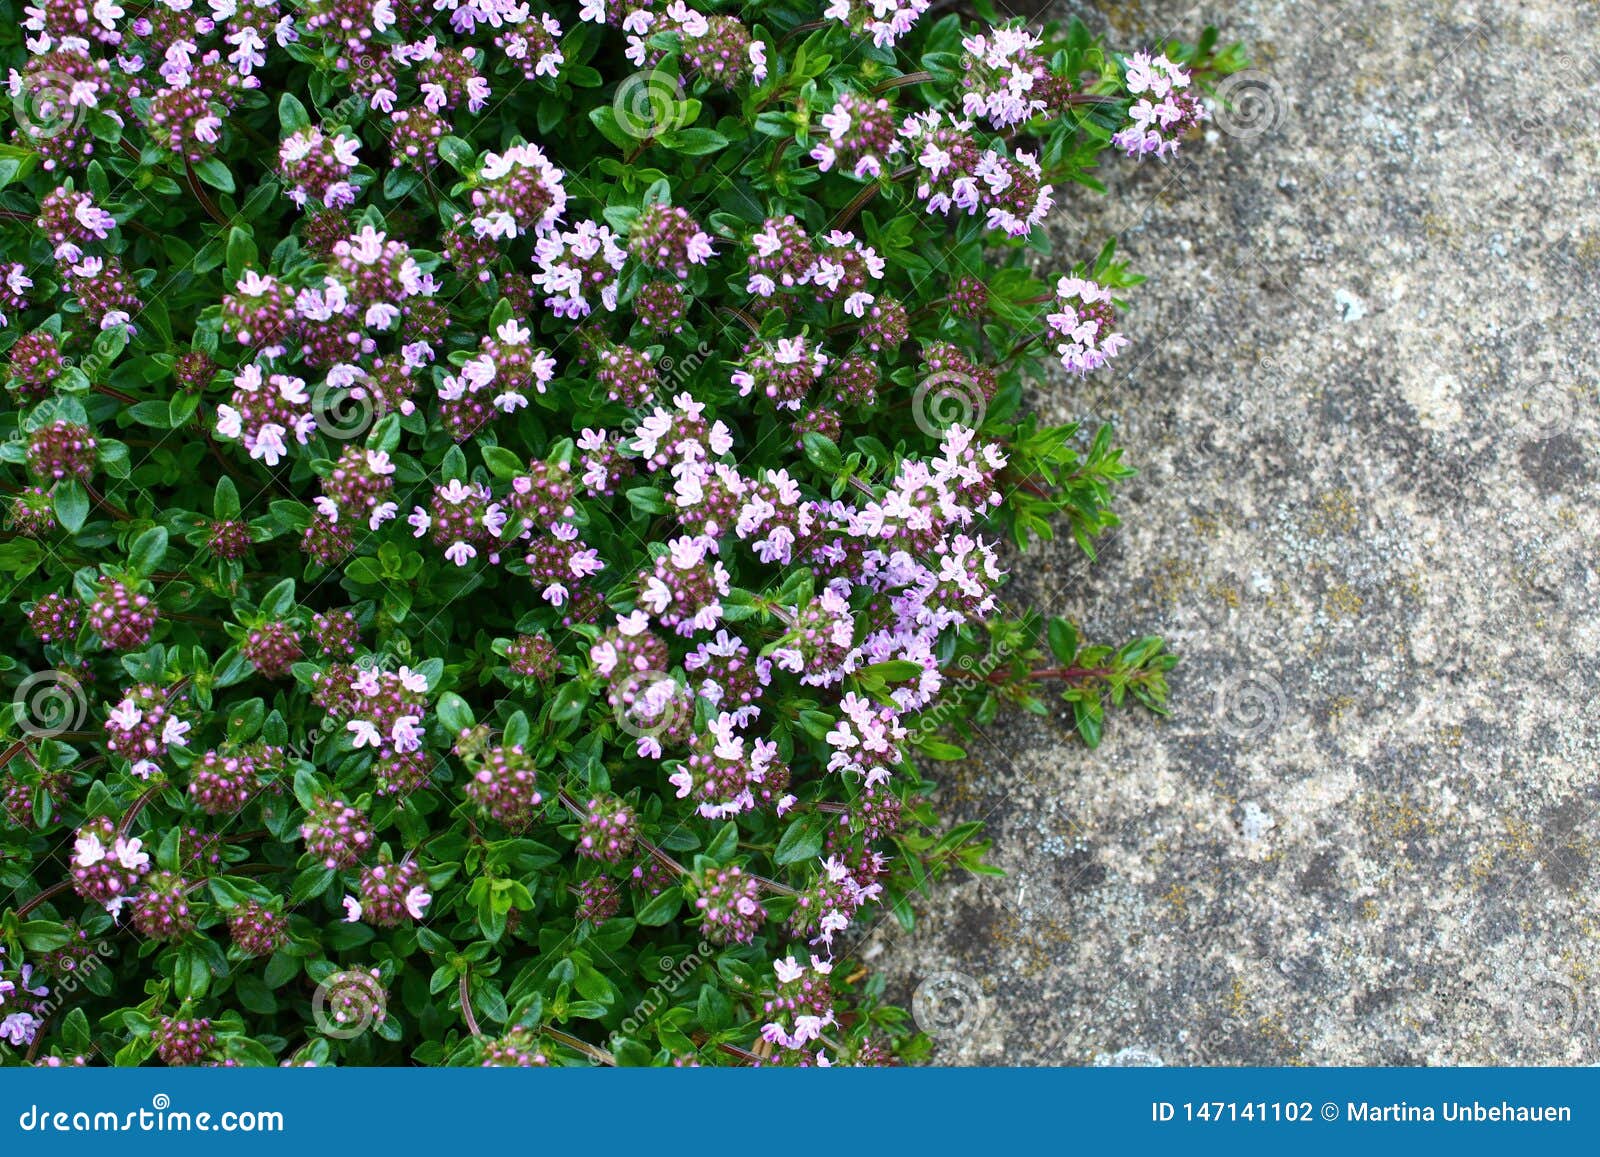 Blossoming Thyme In The Garden Stock Photo Image Of Organic